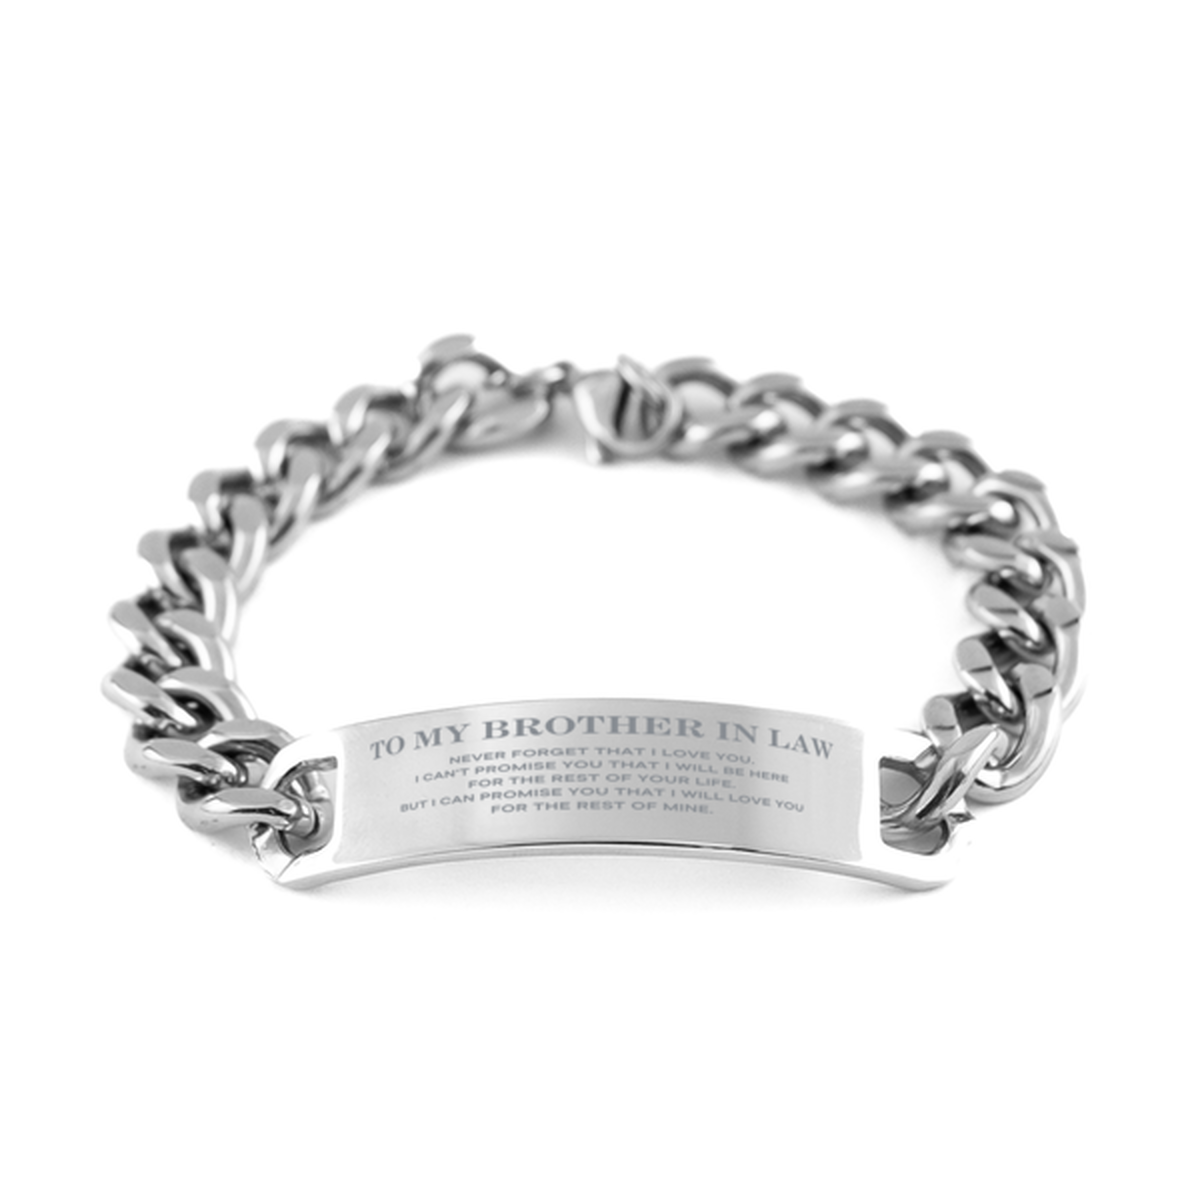 To My Brother In Law Gifts, I will love you for the rest of mine, Love Brother In Law Bracelet, Birthday Christmas Unique Cuban Chain Stainless Steel Bracelet For Brother In Law